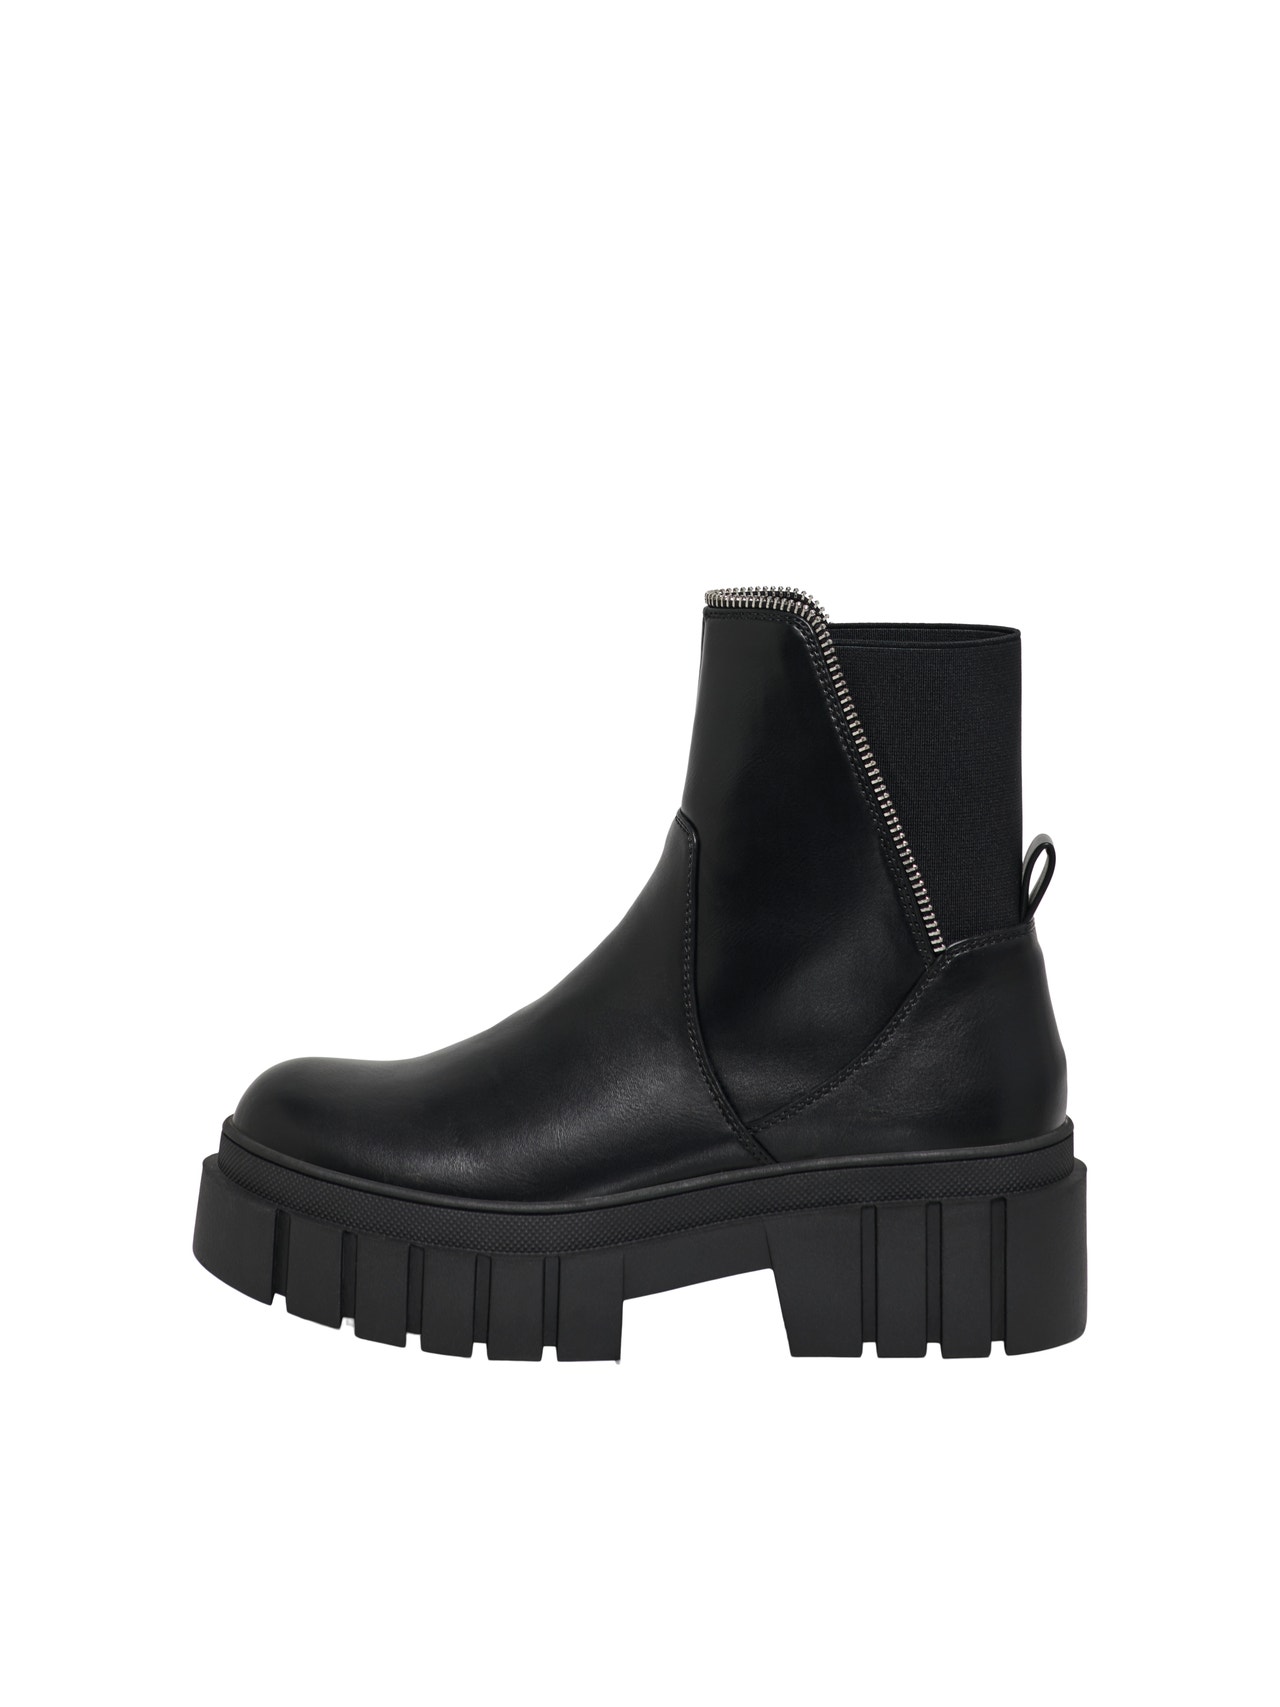 ONLY Round toe Boots -Black - 15304991